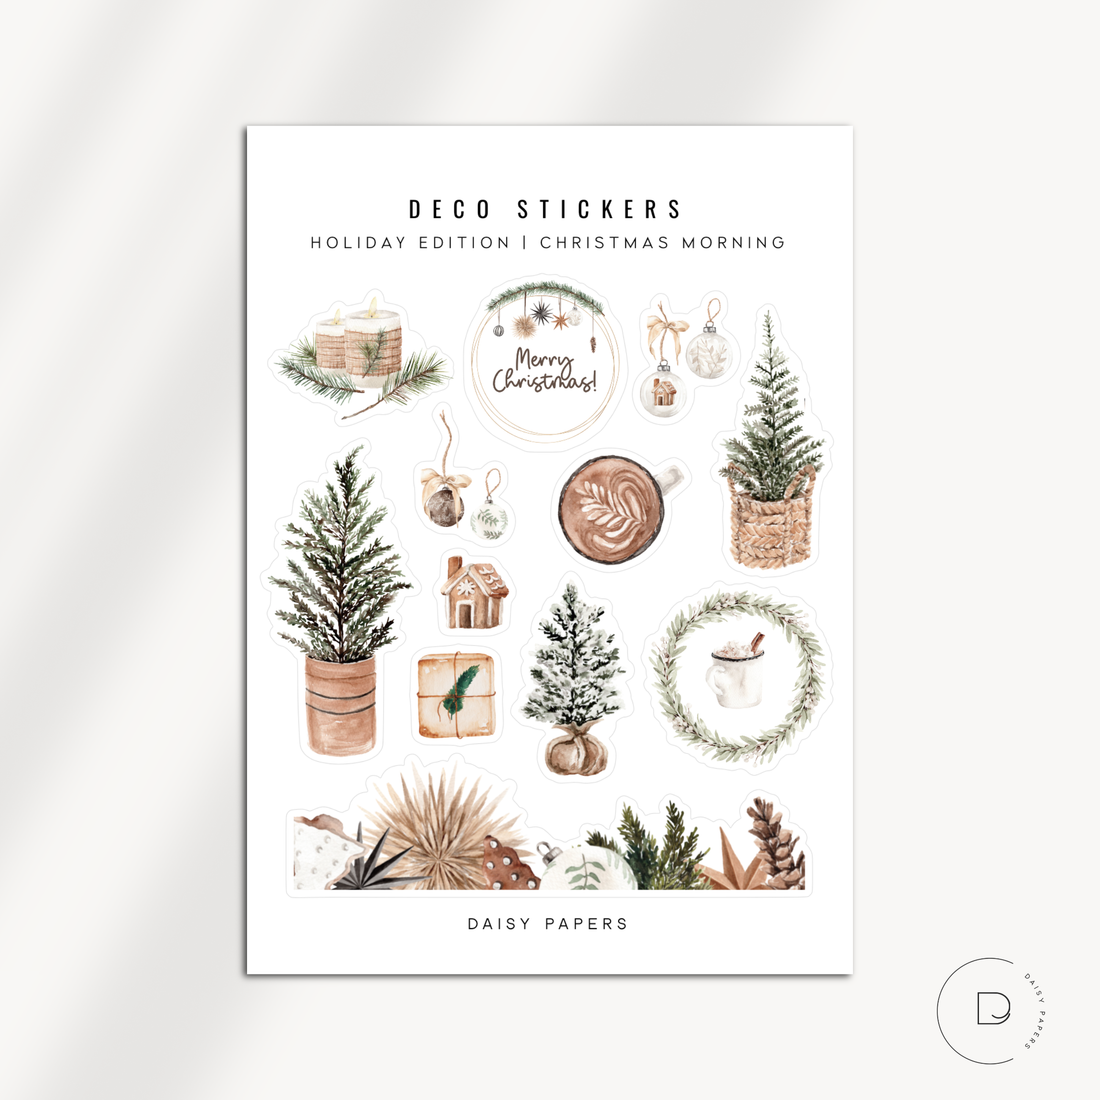 DECO STICKERS - HOLIDAY EDITION | CHRISTMAS MORNING